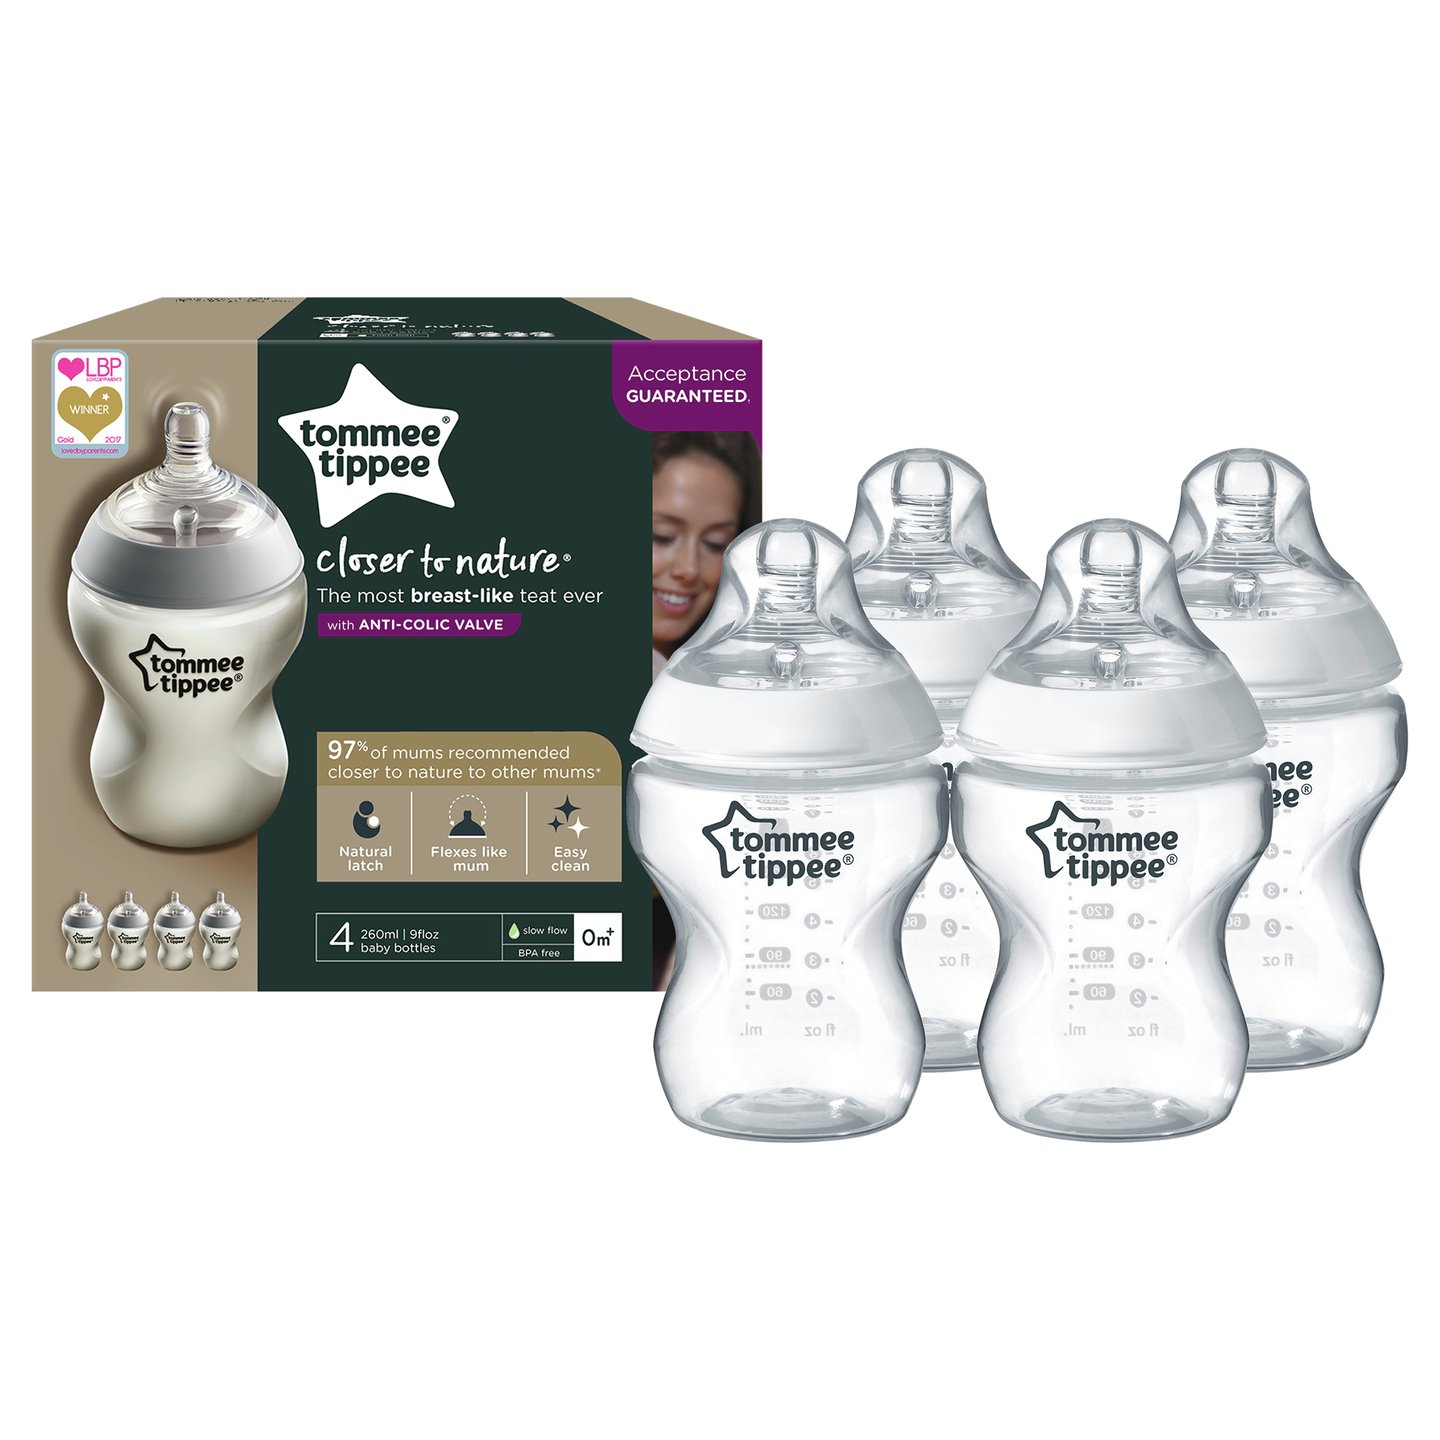 Tommee Tippee Closer to Nature Bottles 260ml x 4 Review